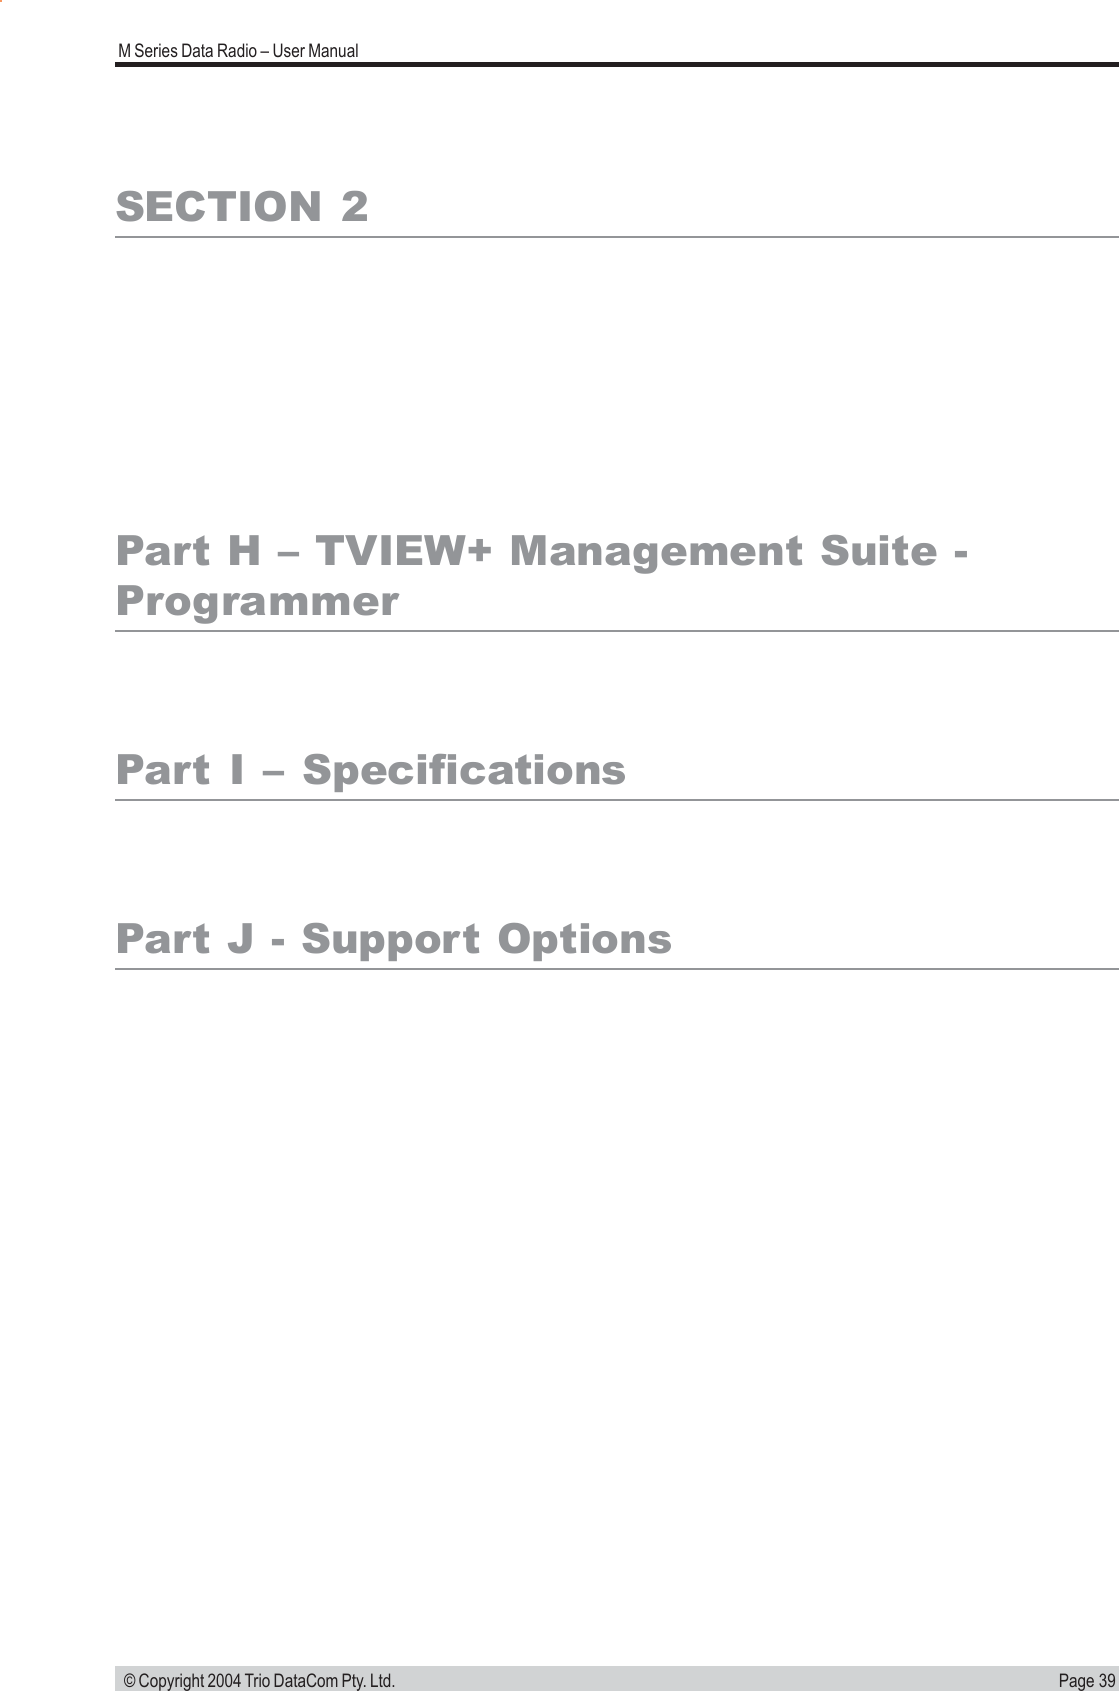 Page 39M Series Data Radio – User Manual © Copyright 2004 Trio DataCom Pty. Ltd.SECTION 2Part H – TVIEW+ Management Suite -ProgrammerPart I – SpecificationsPart J - Support Options